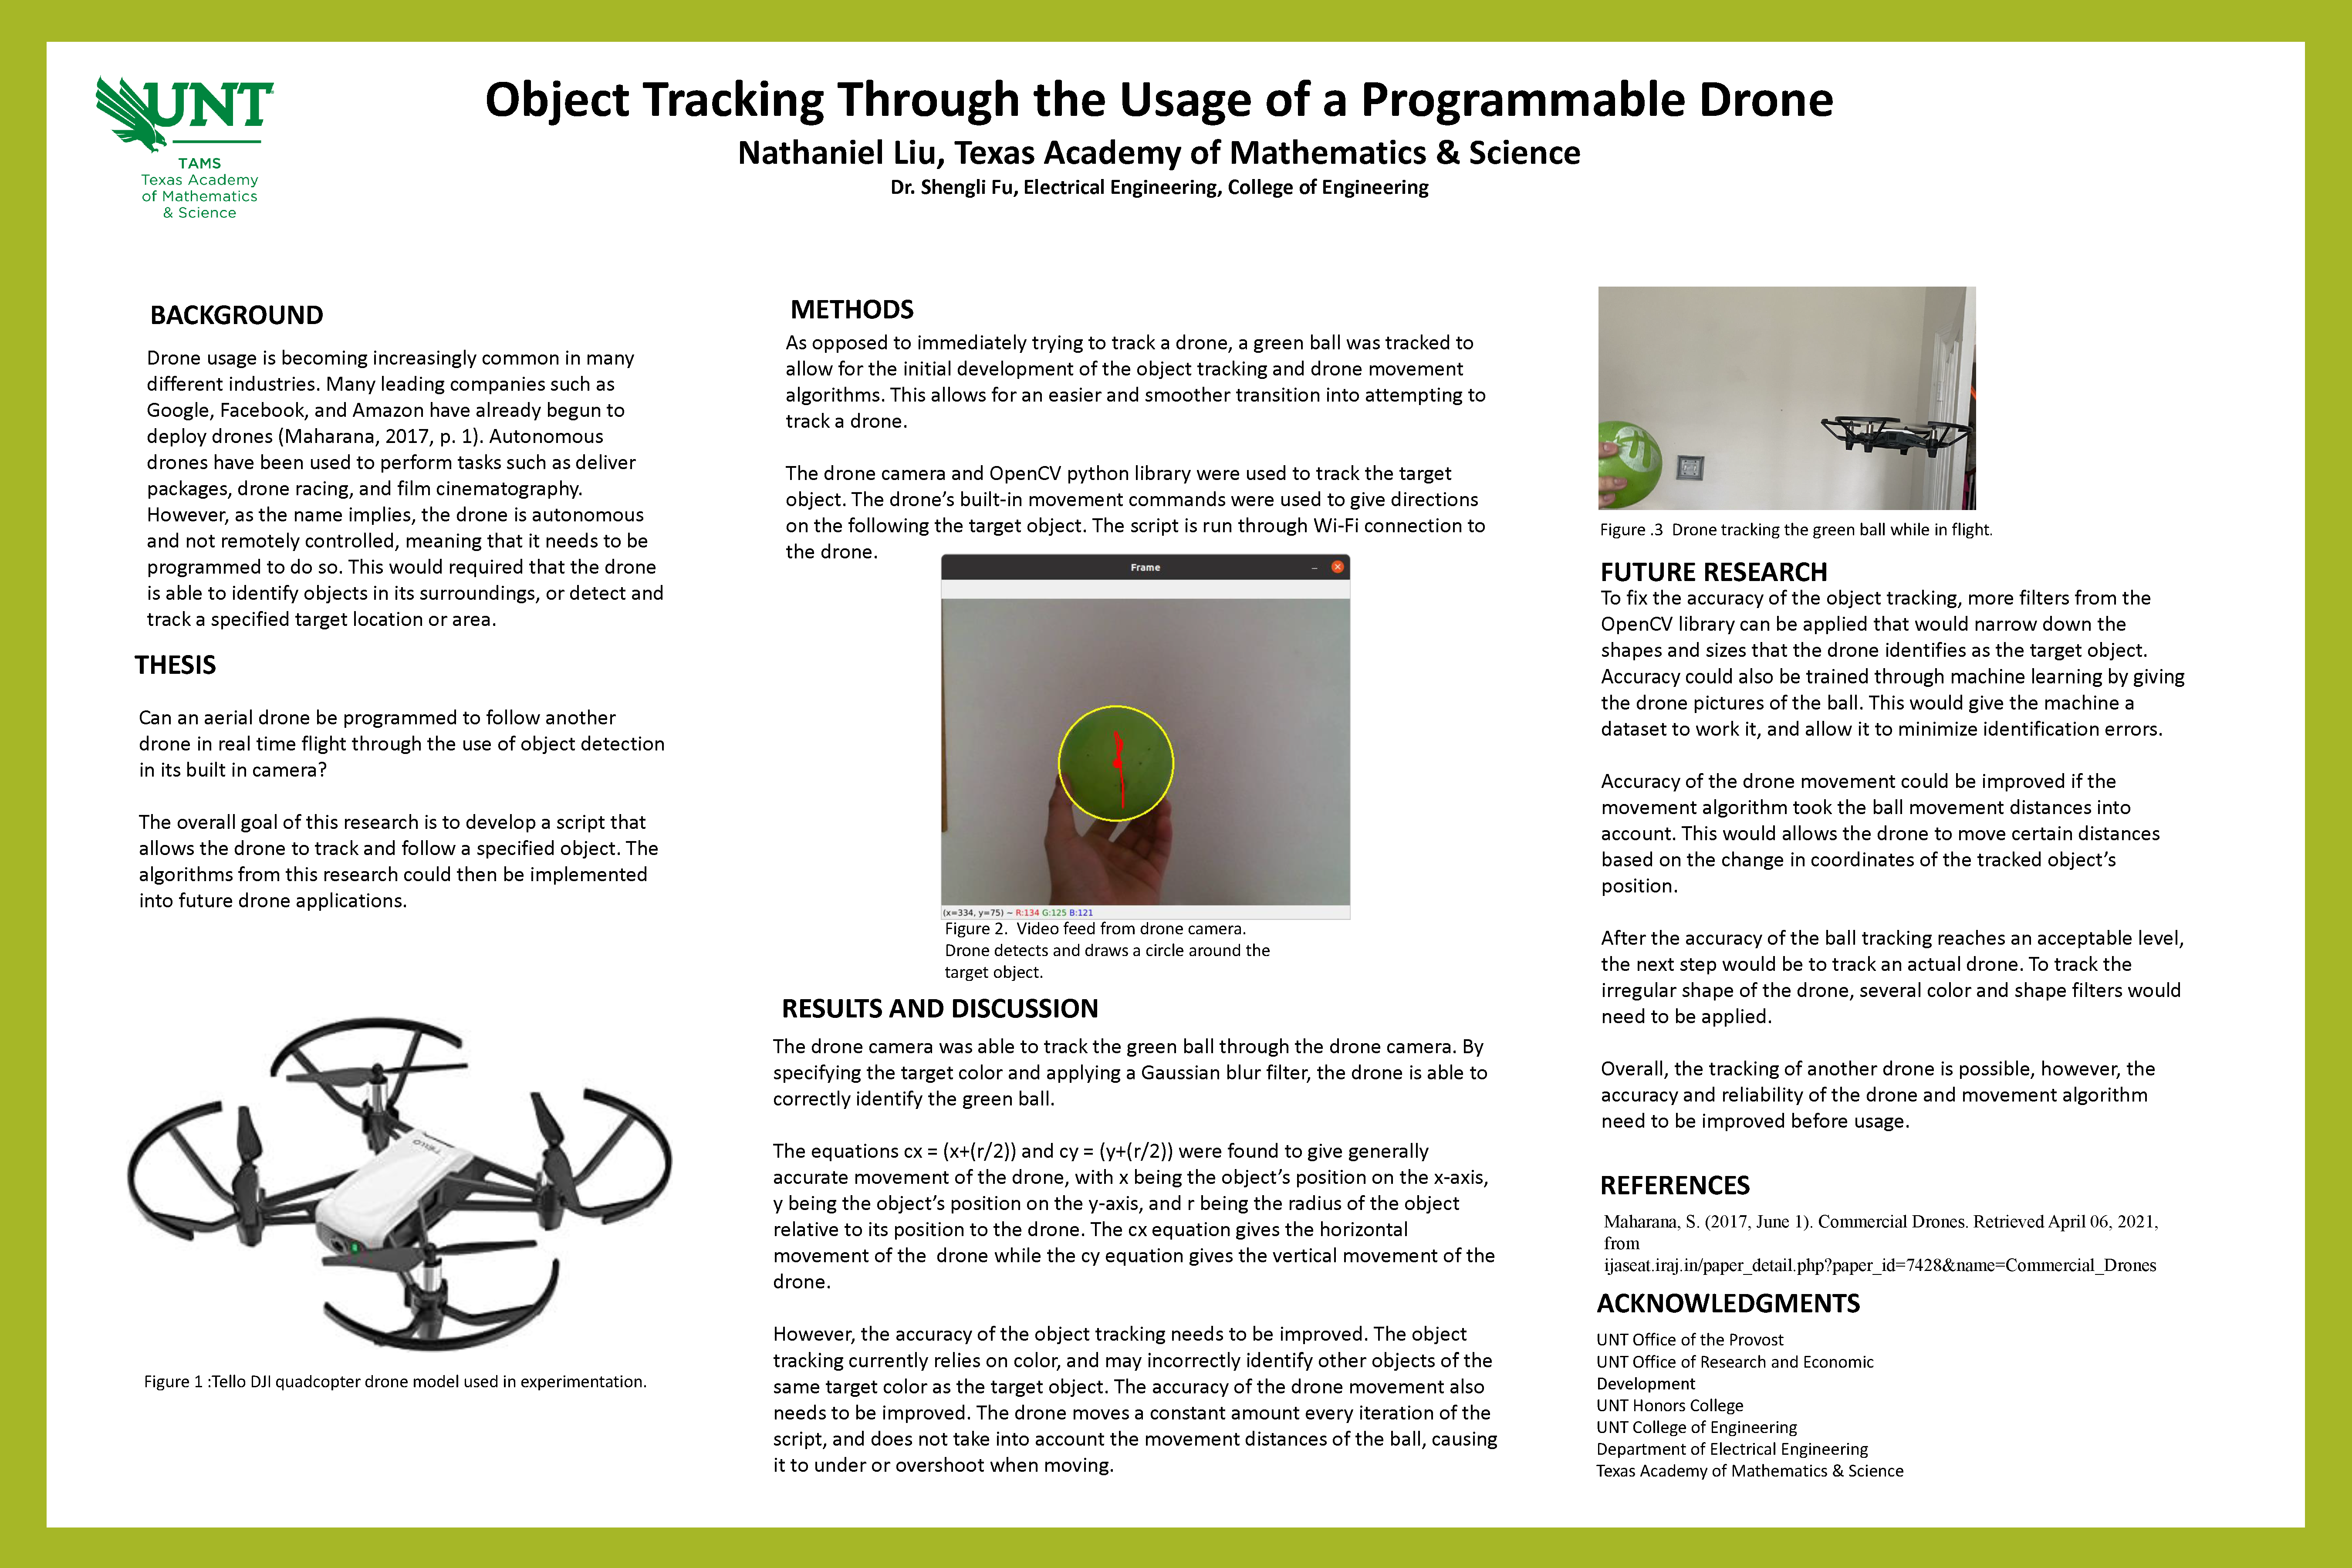 Object Tracking Through the Usage of a Programmable Drone